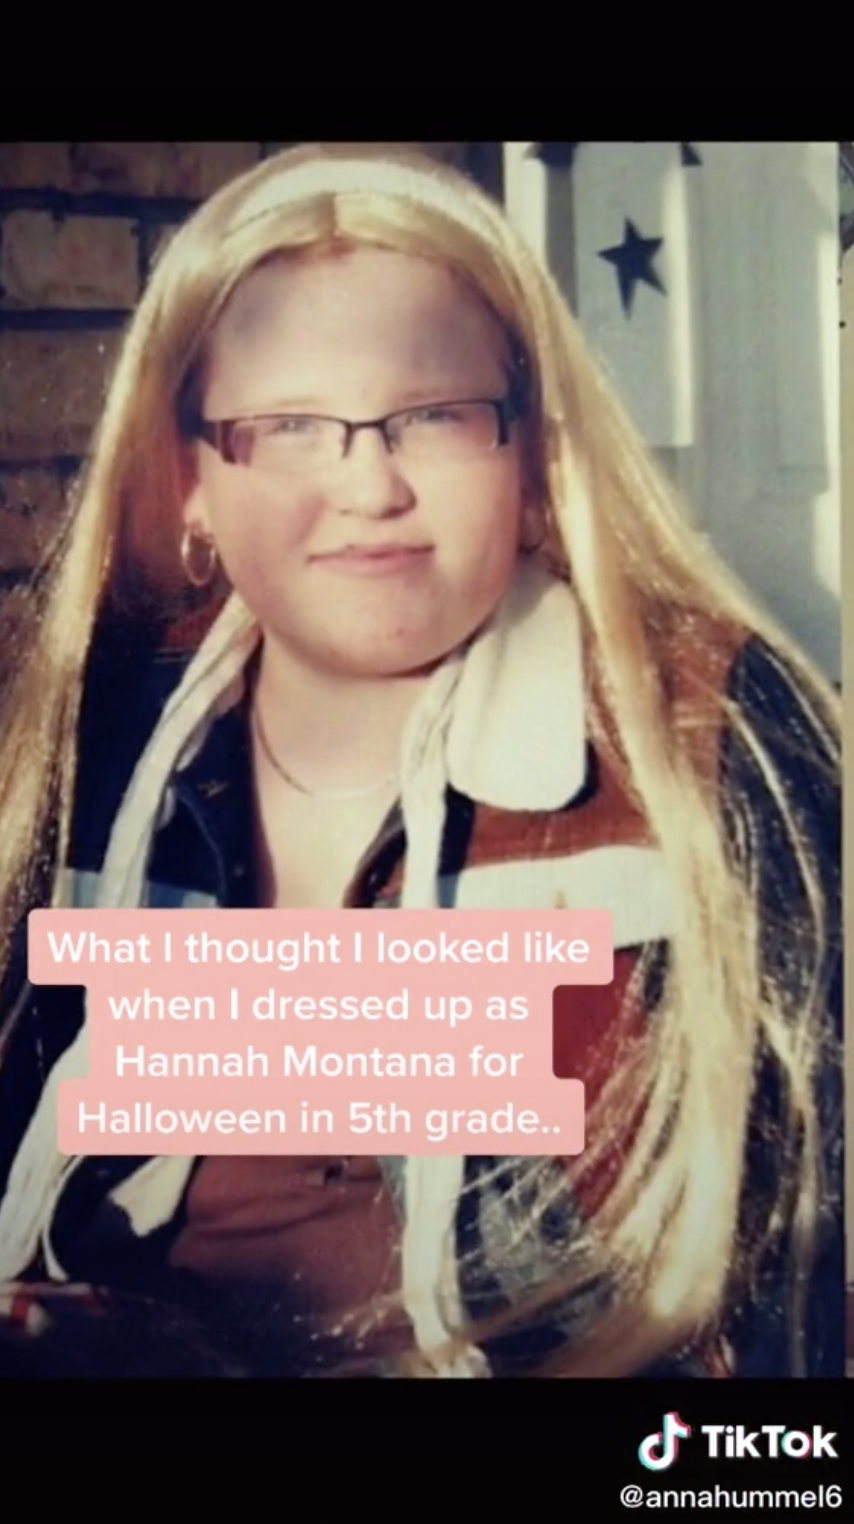 Still of  @annahummel6 with a caption that says, &quot;What I thought I looked like when I dressed up as Hannah Montana for Halloween in 5th grade..&quot;